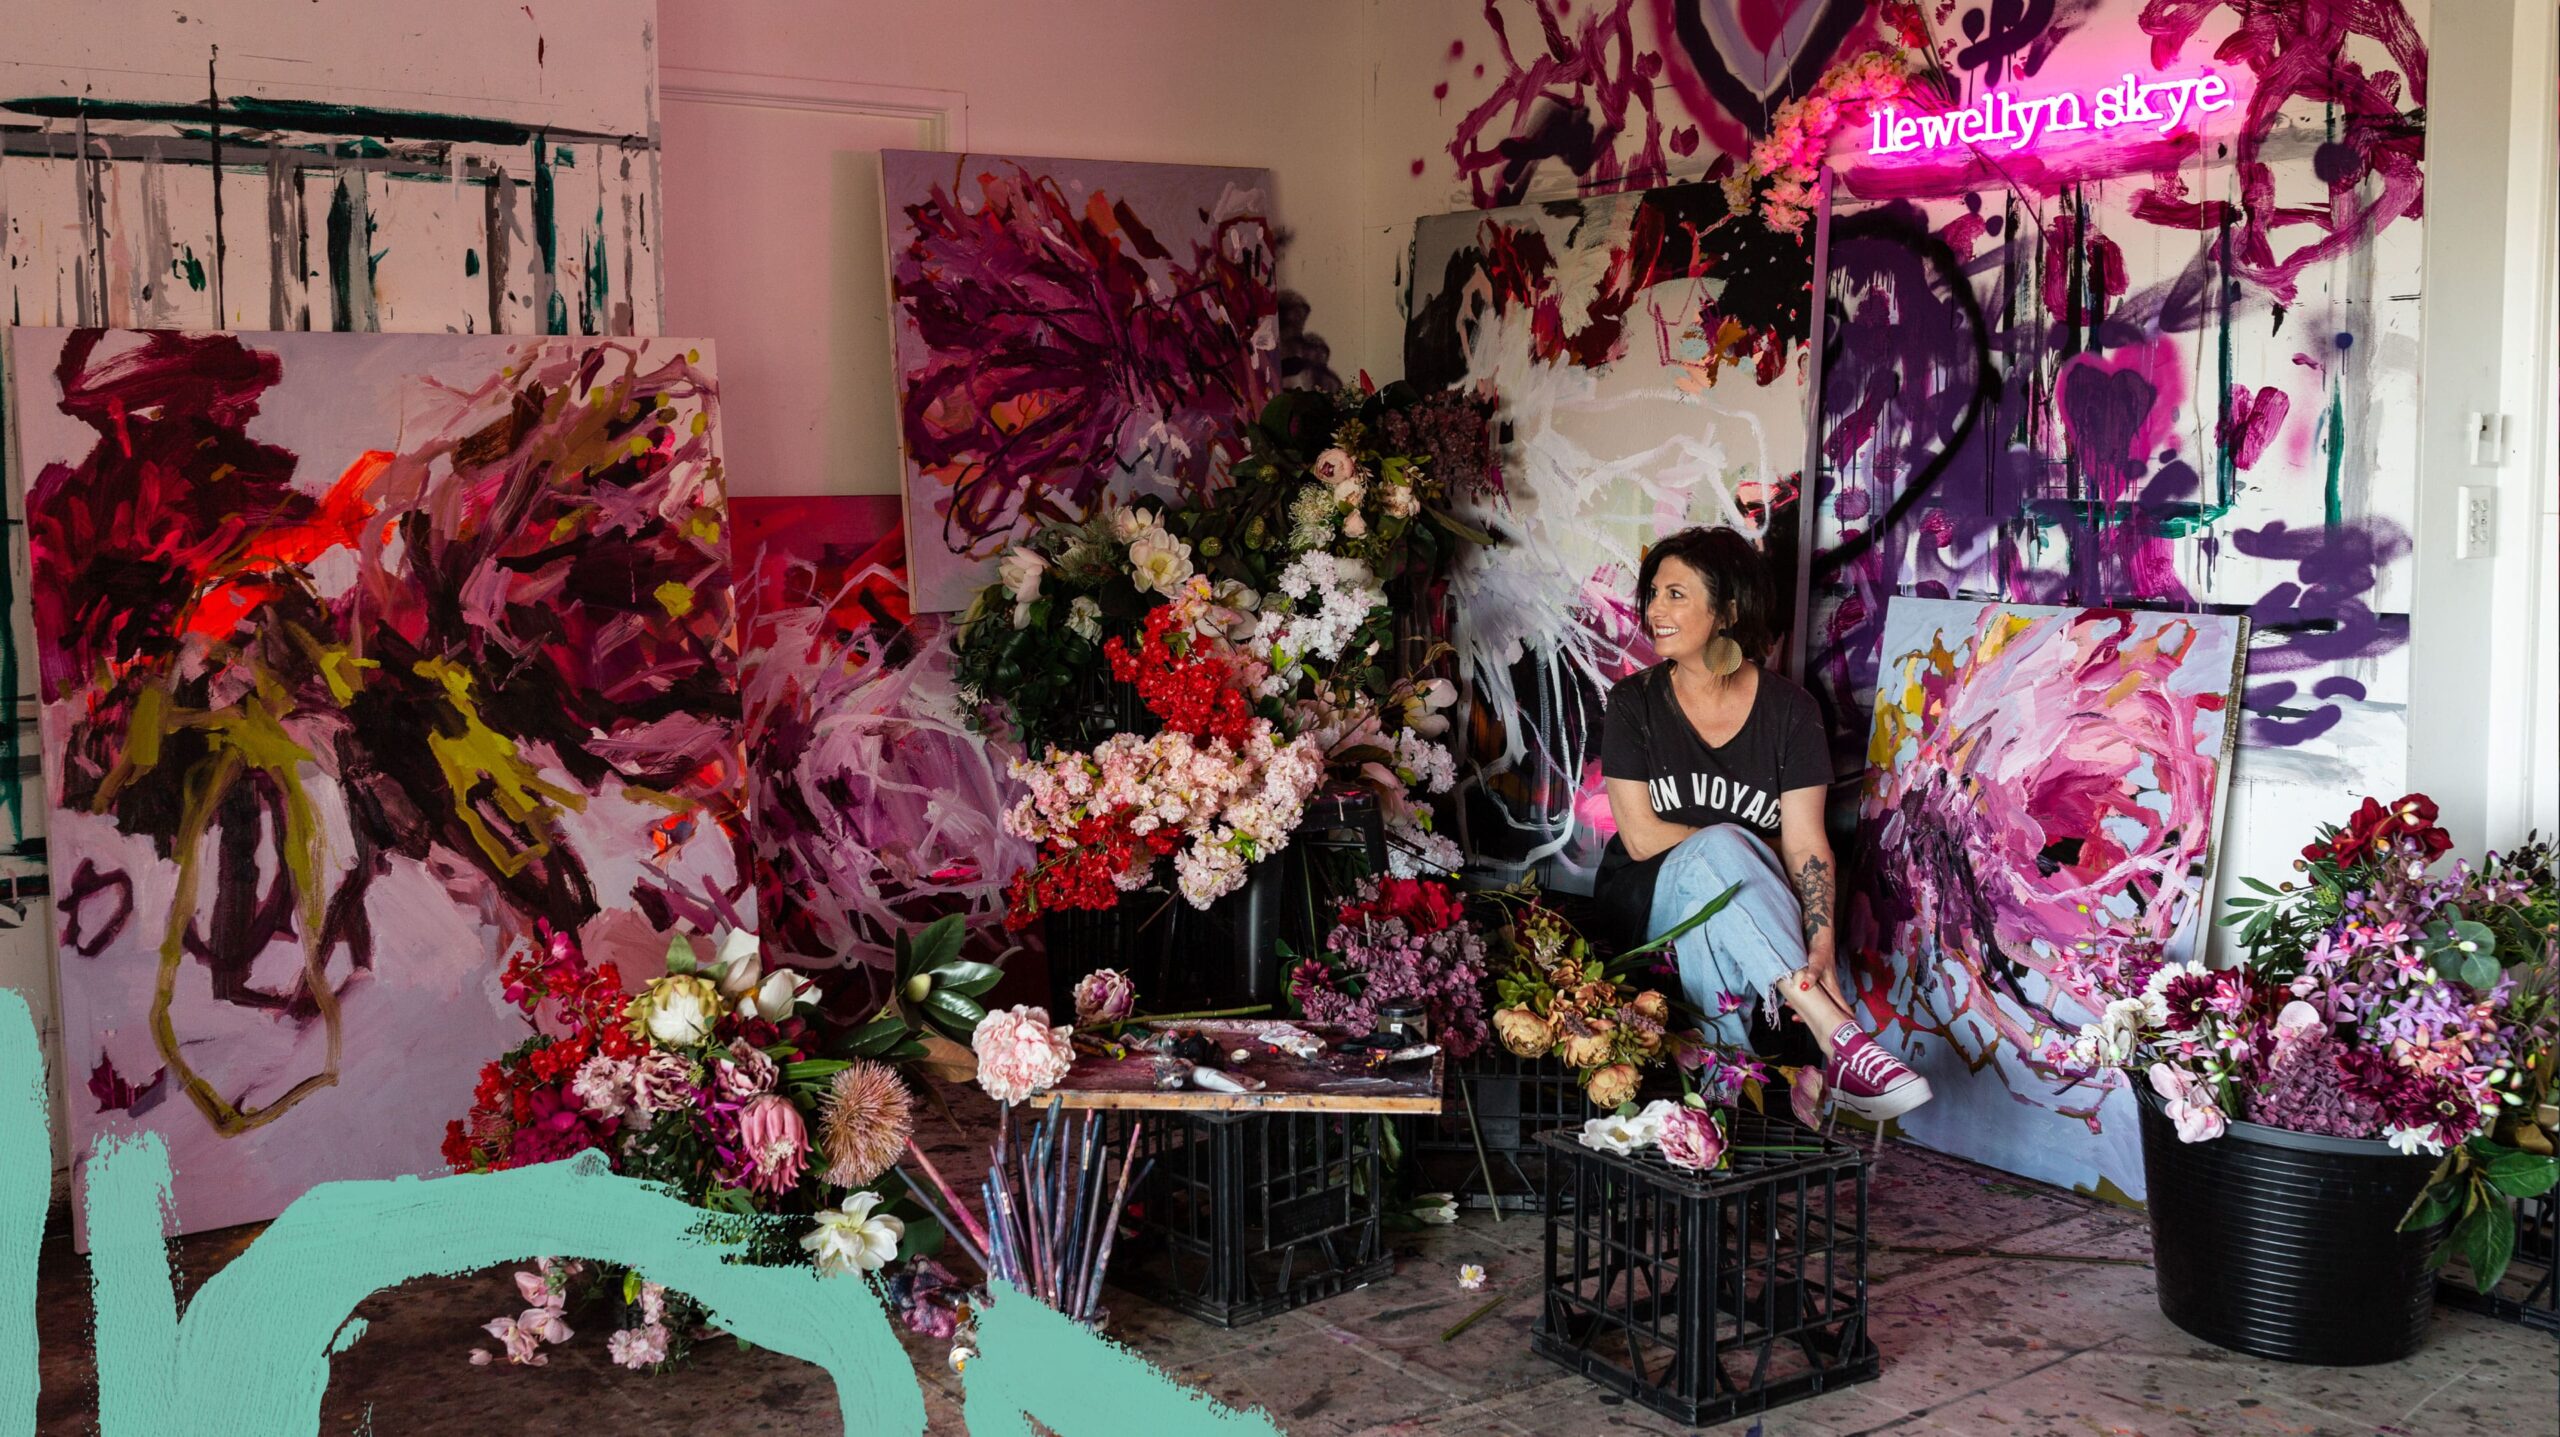 Artist Llewellyn Skye in her Gold Coast studio surrounded by her muse, florals